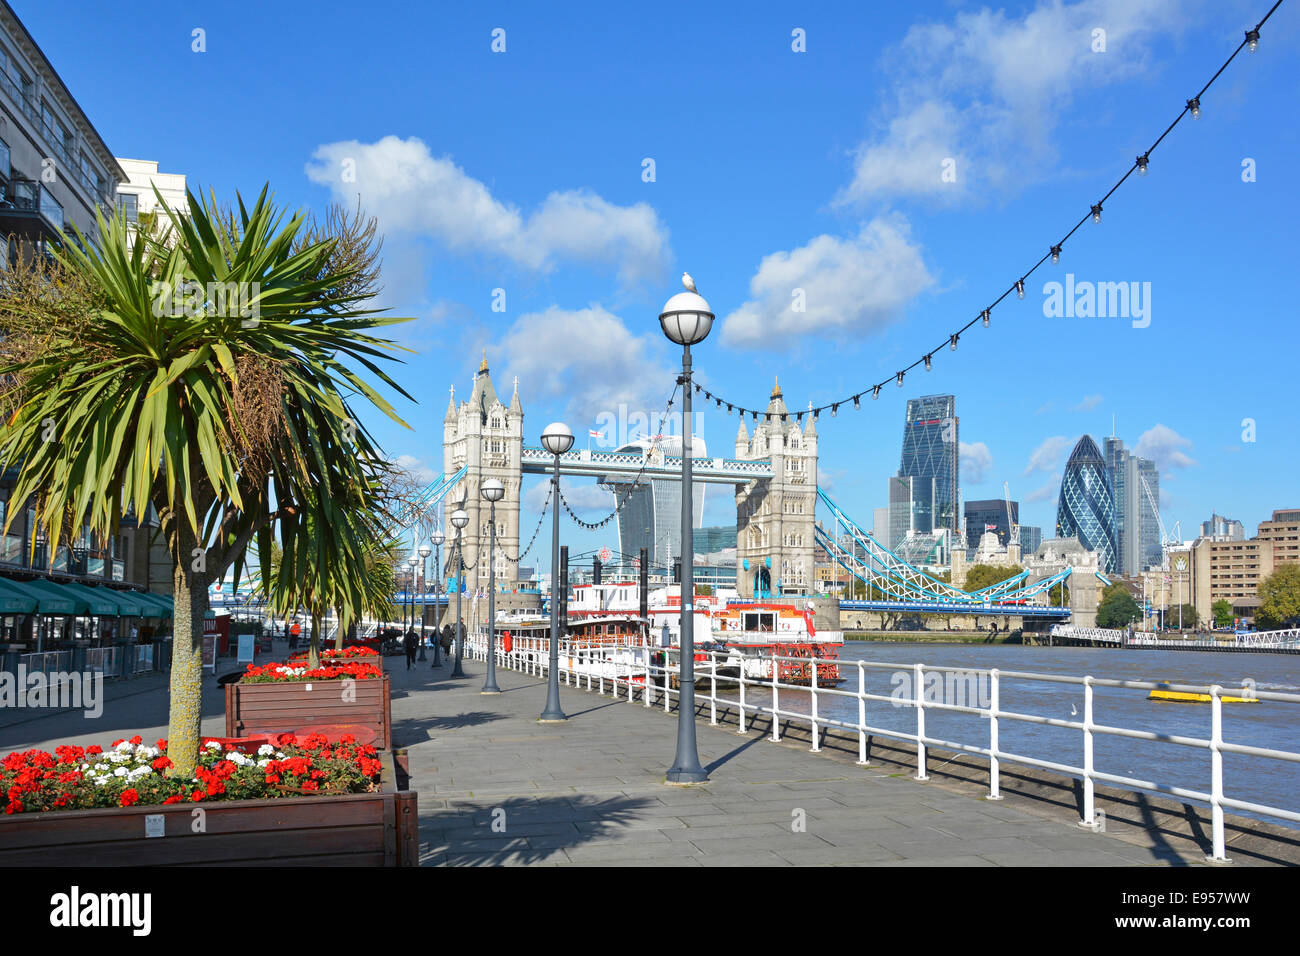 Thames Path Butlers Wharf on River Thames Tower Bridge views riverside apartments restaurants canopies & red flower cordyline tree planters London UK Stock Photo